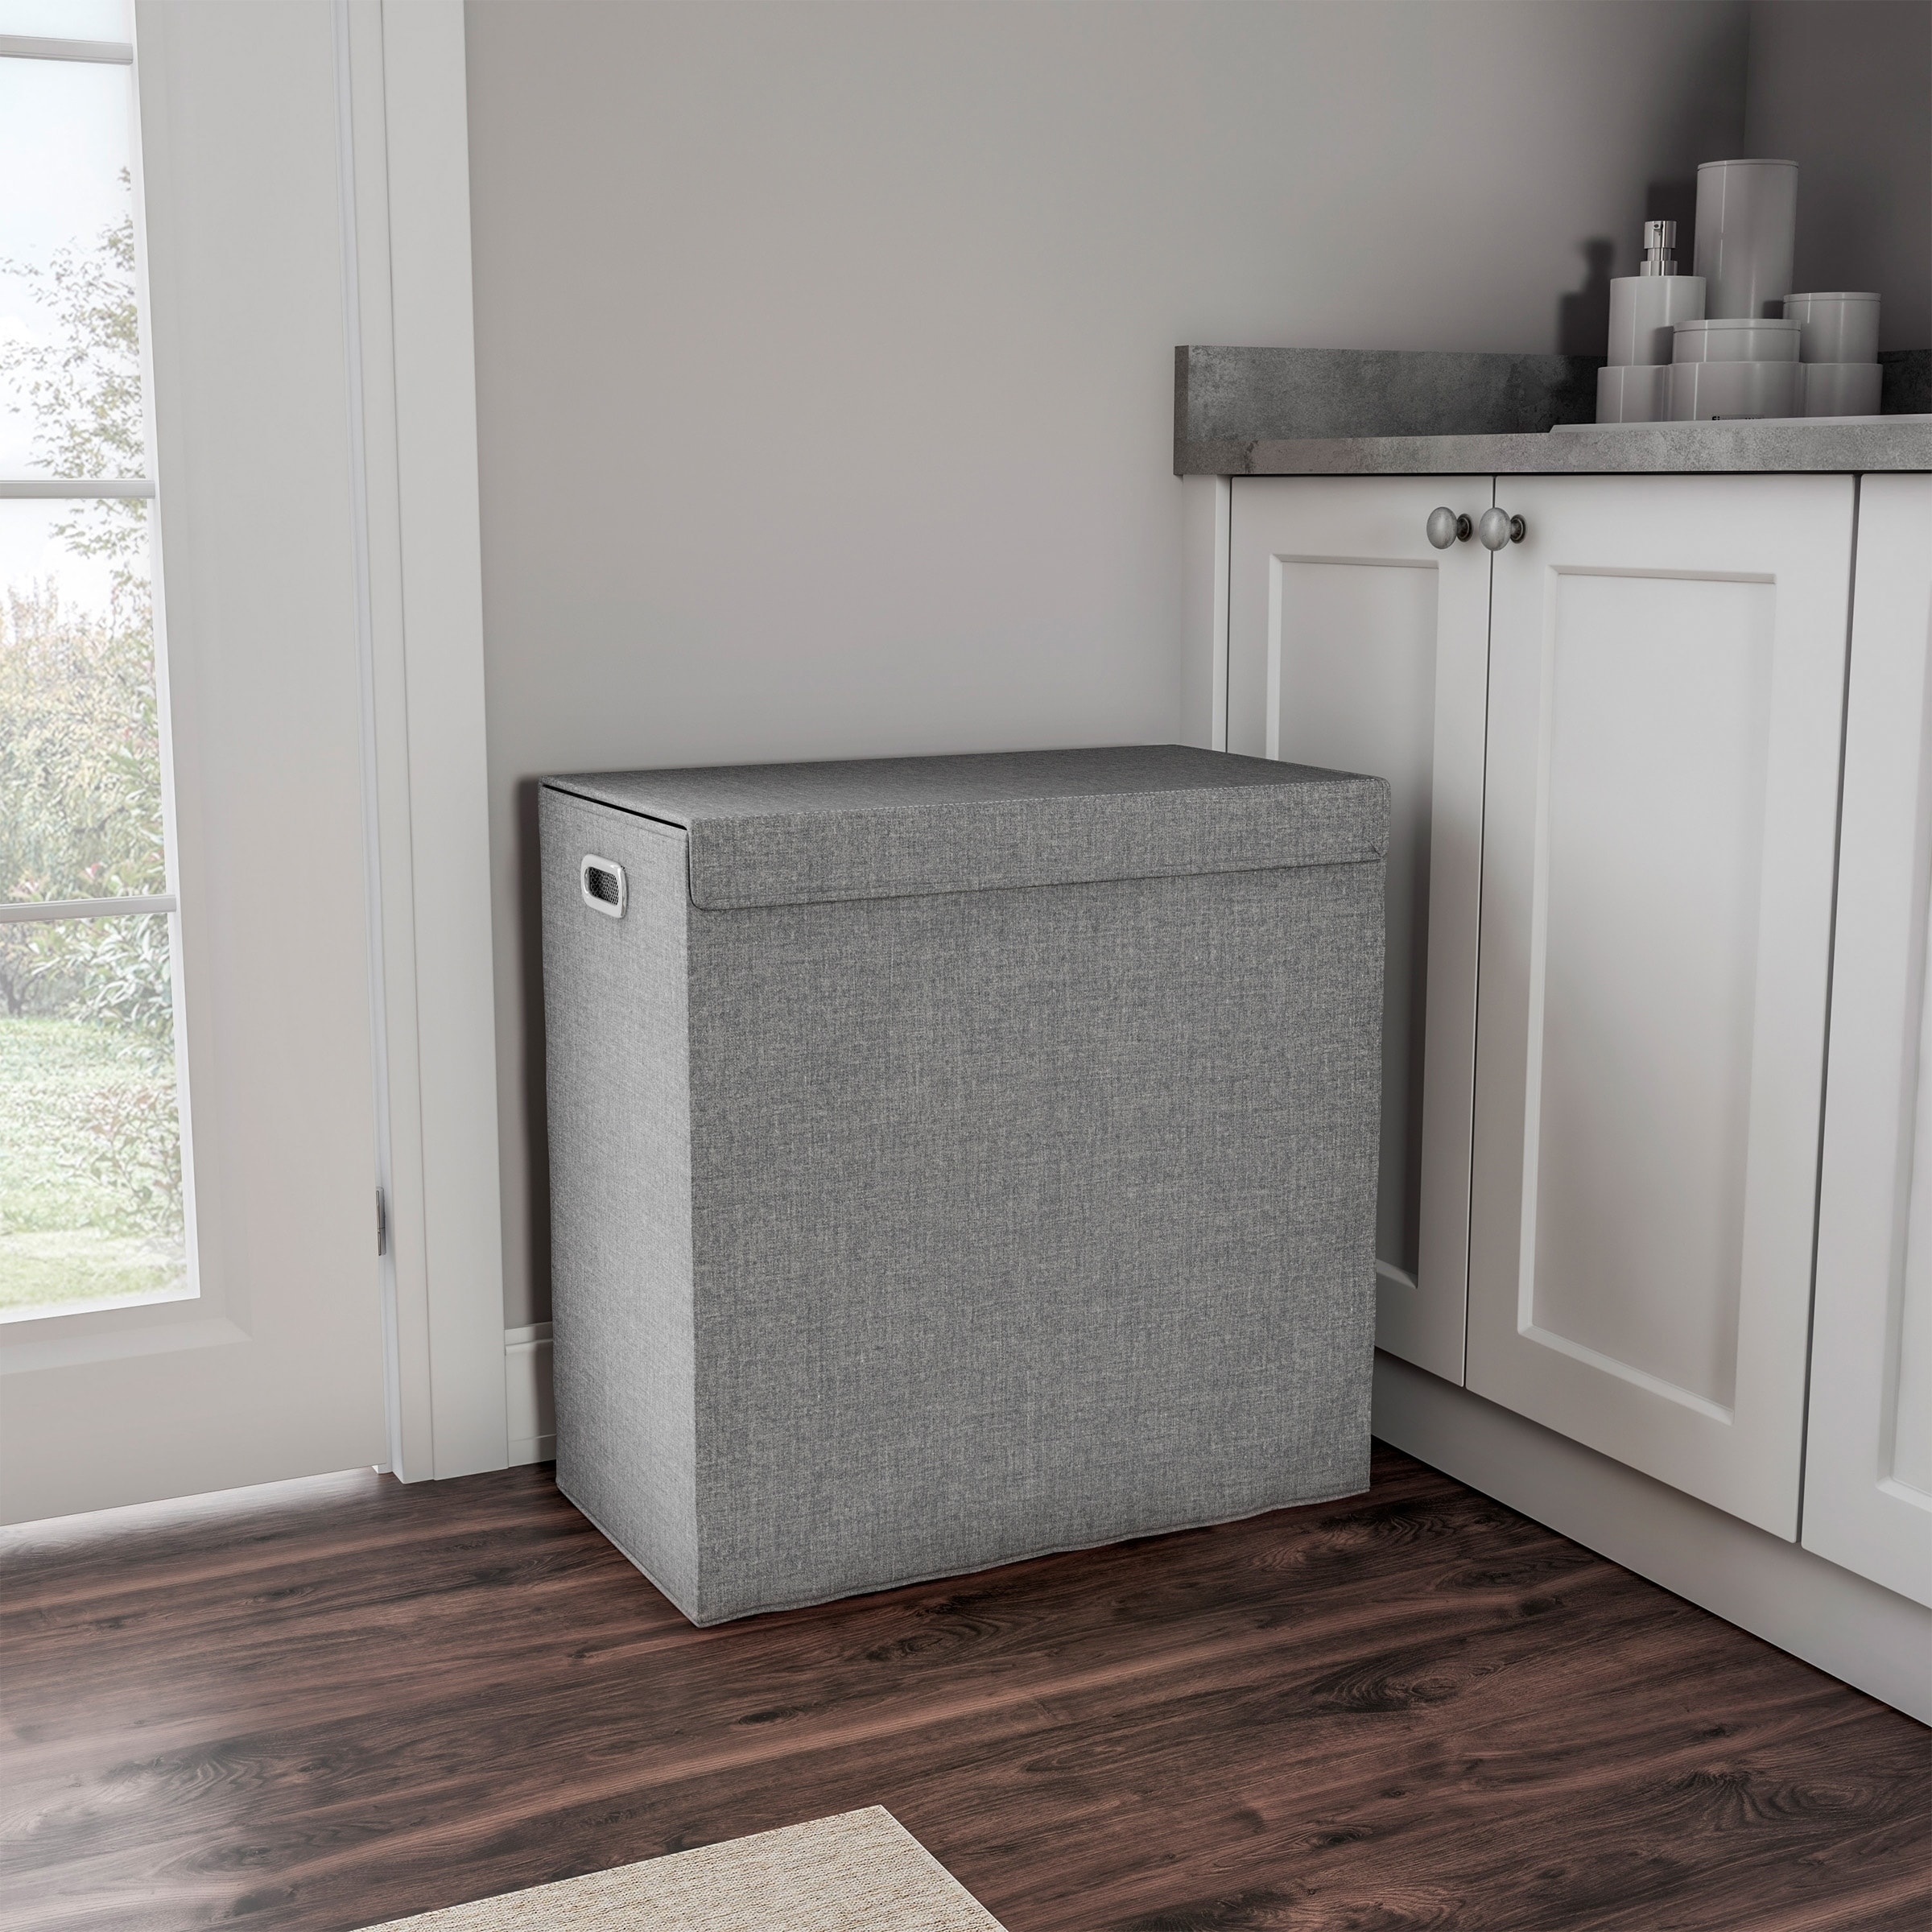 Dark Gray Balconies. Greenstell Laundry Hamper with Lid and Oval Handles for Easy Movement Pop-Up laundry mesh bag and Foldable Double Grid Laundry Hamper Basket used in Bedrooms Laundry room 